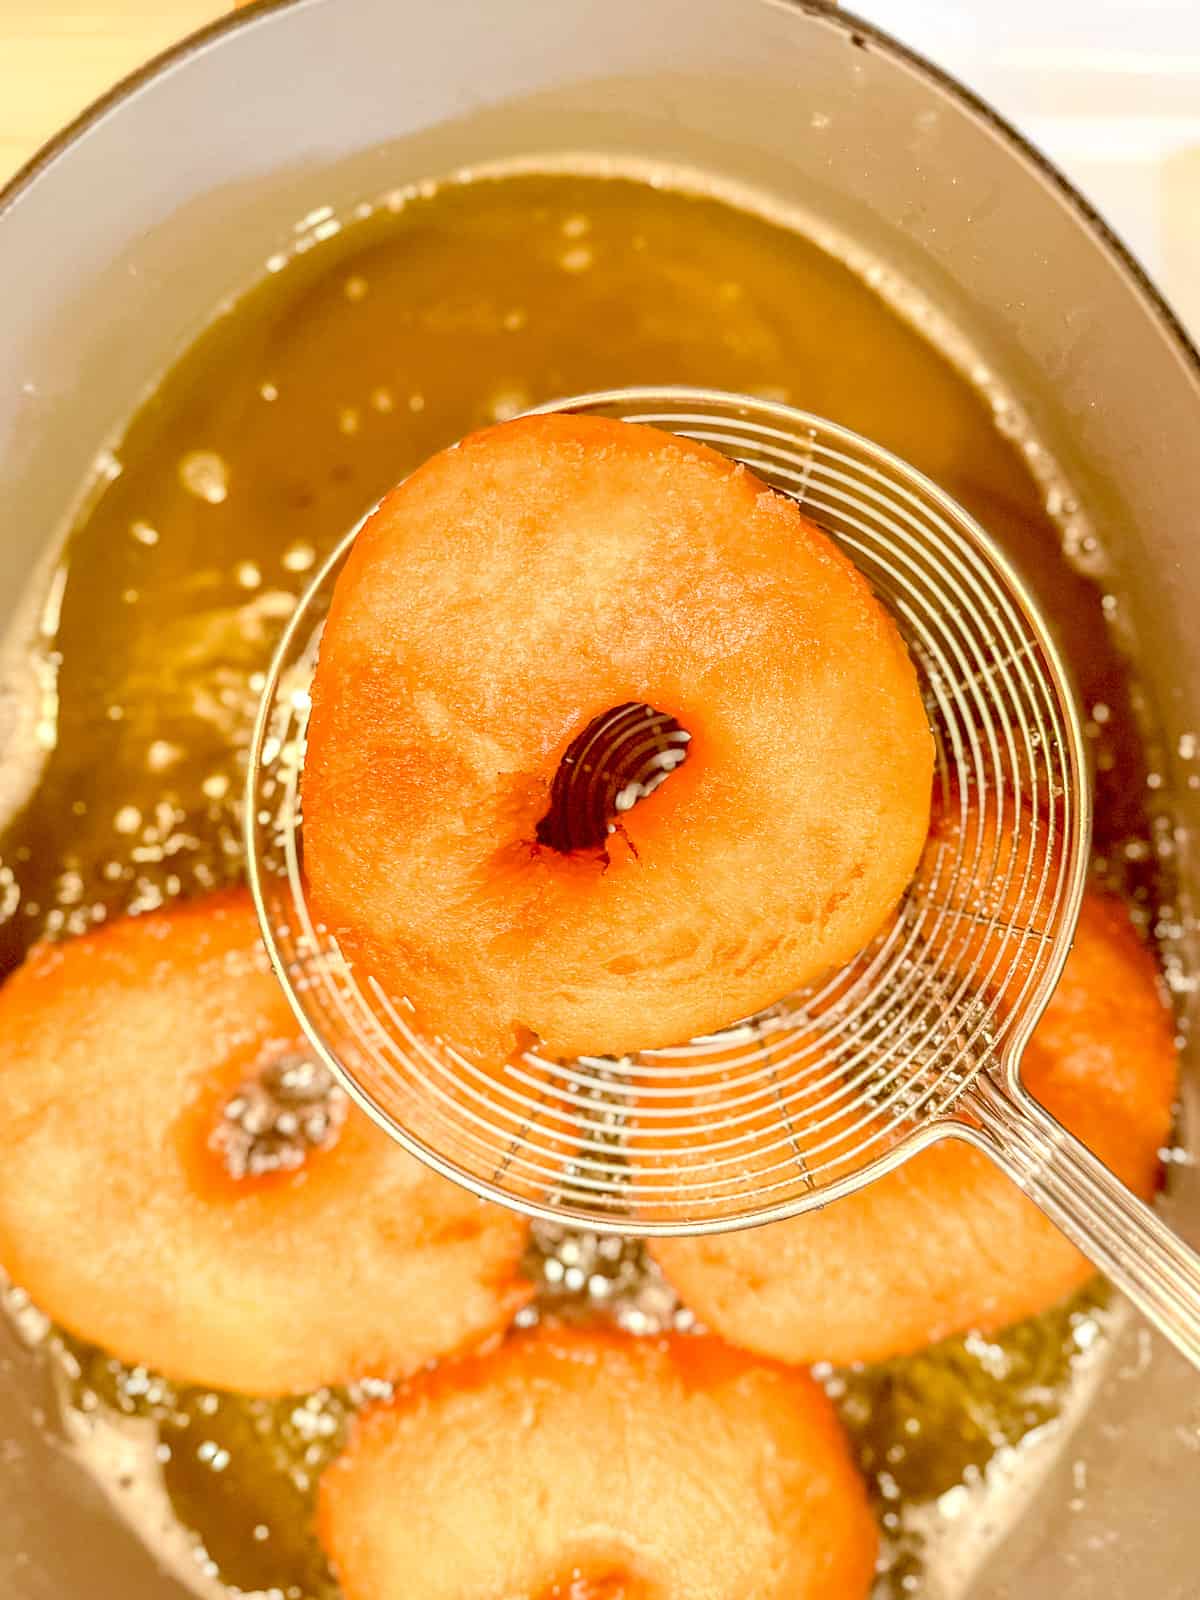 Straining a fried old fashioned buttermilk donut.